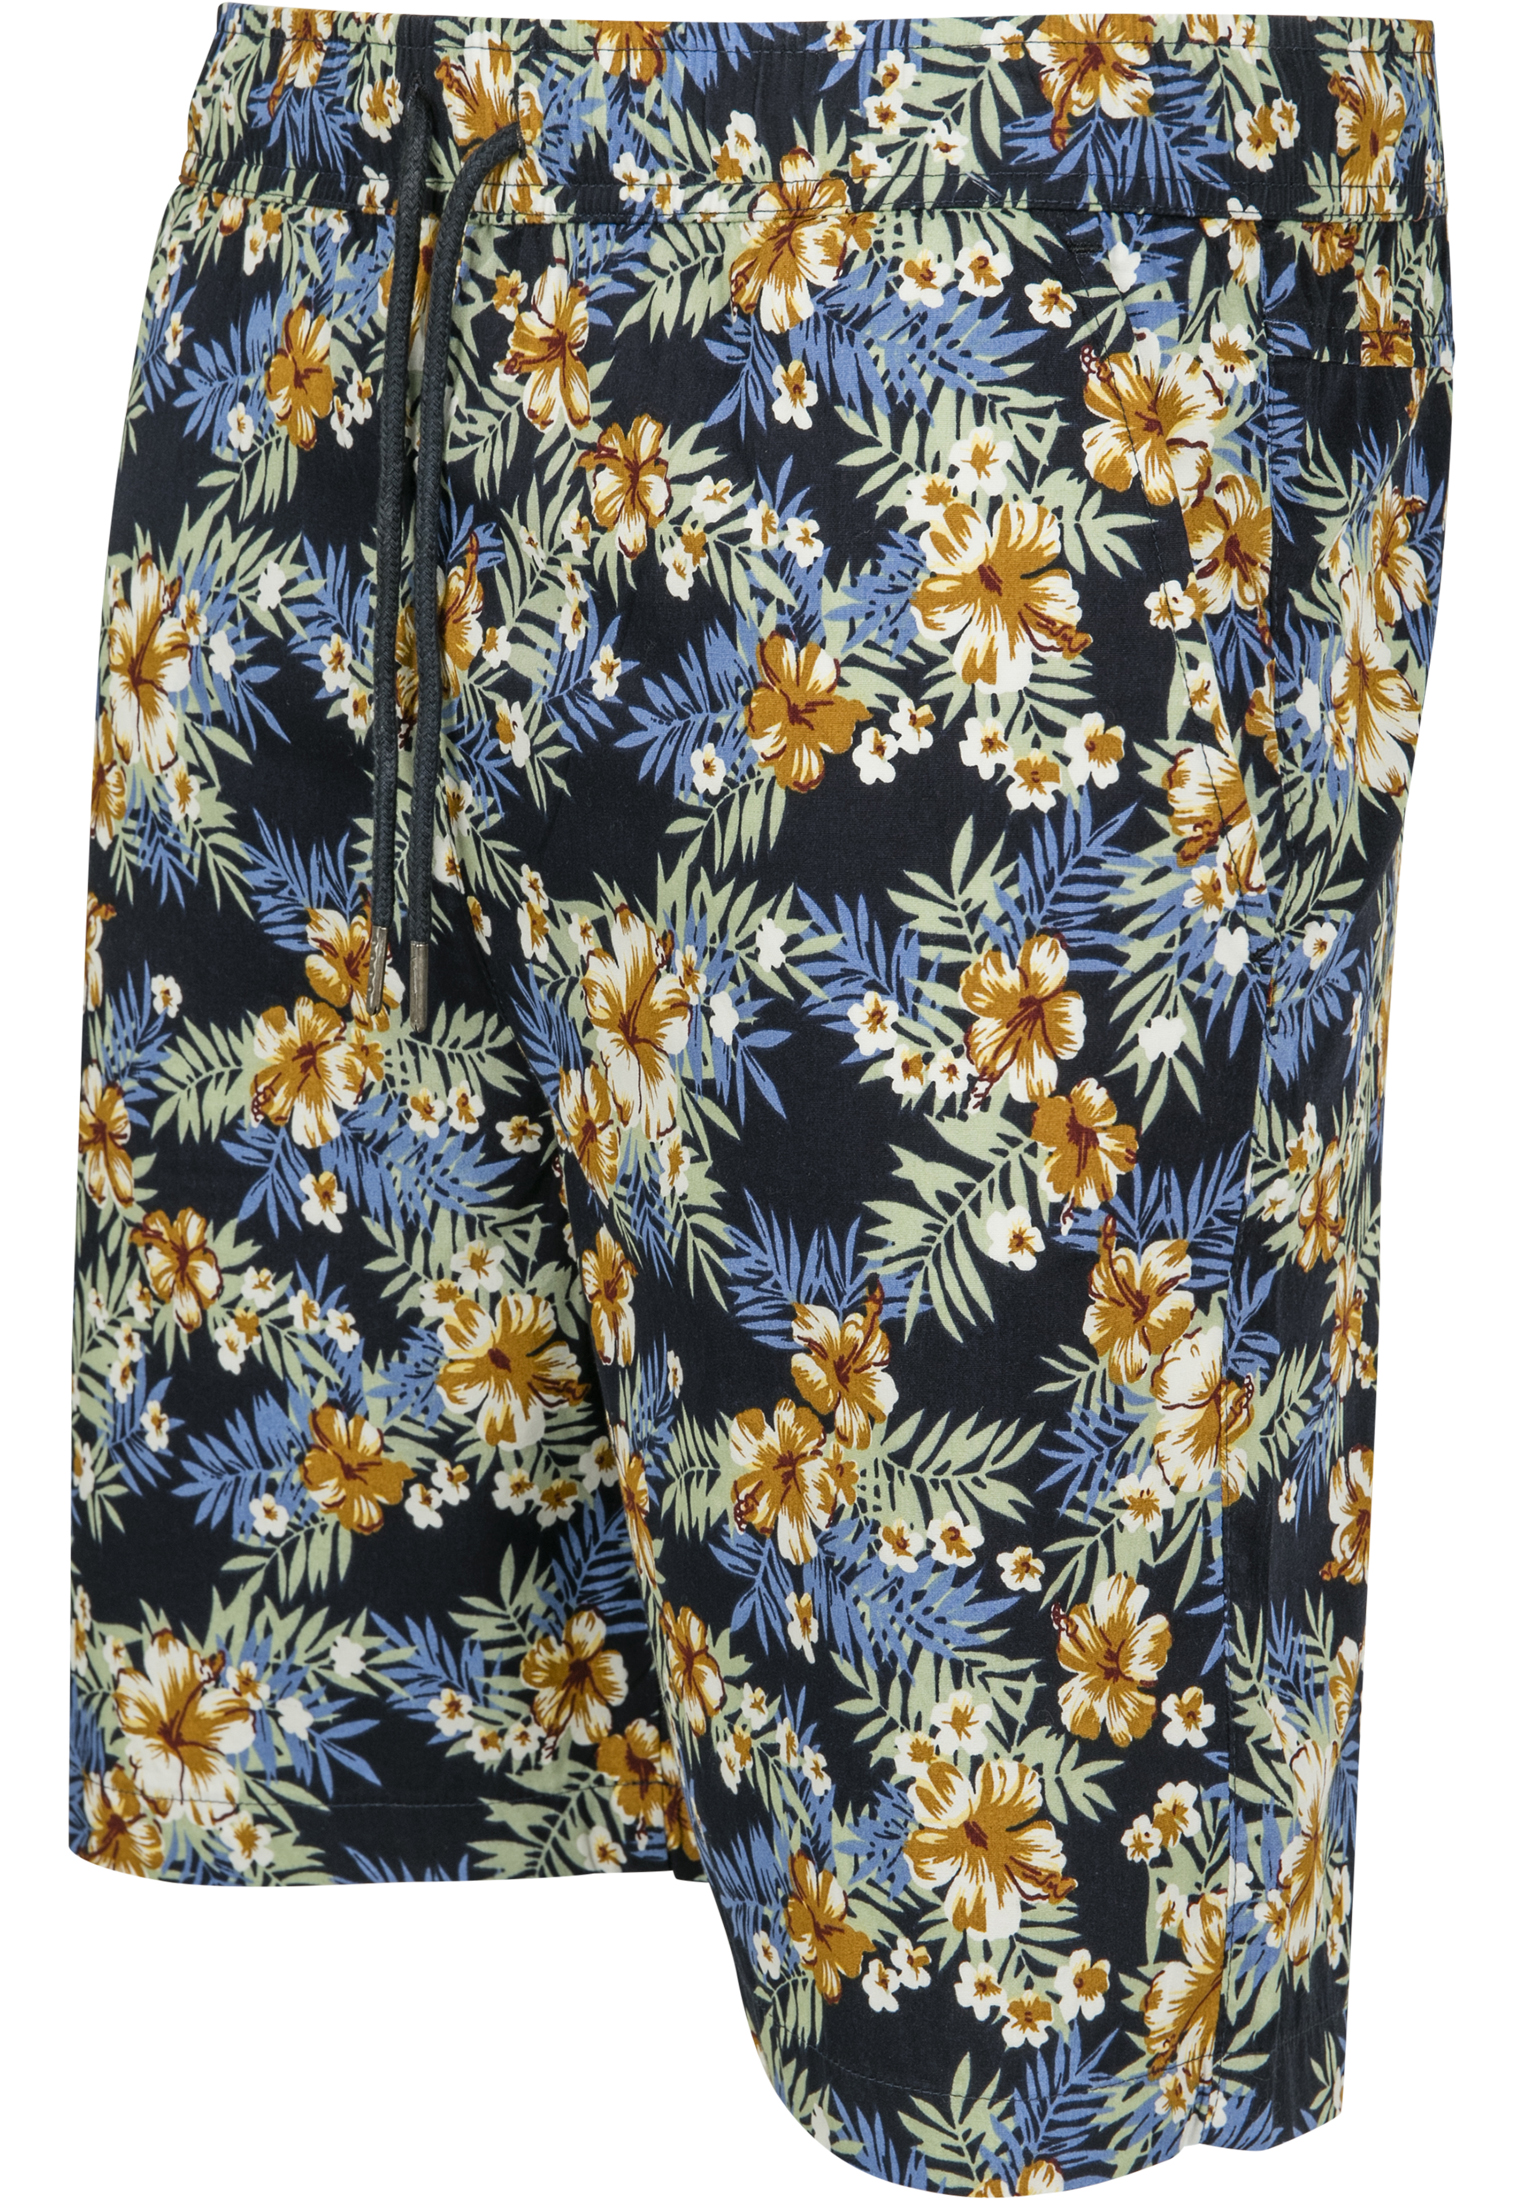 Plus Size Pattern Resort Shorts in Farbe hibiscus